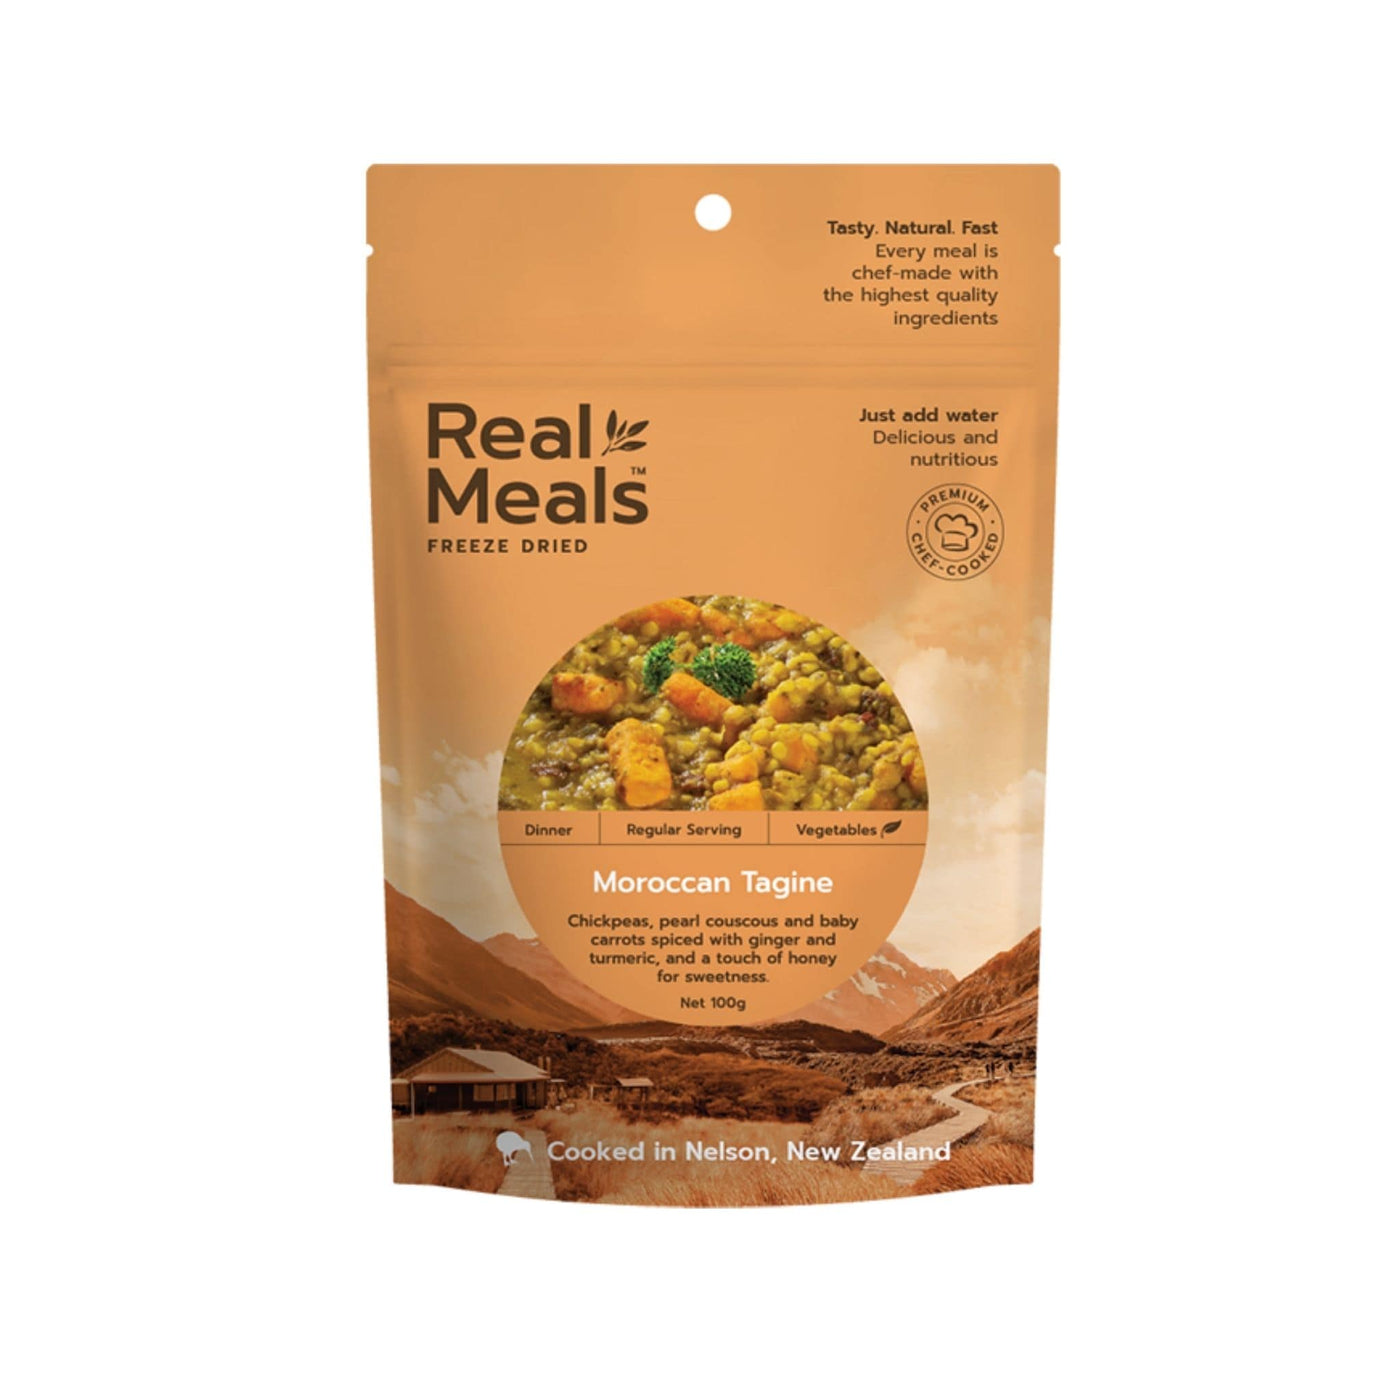 Real Meals Dinner - Moroccan Tagine| Freeze Dried Meals | Further Faster Christchurch NZ